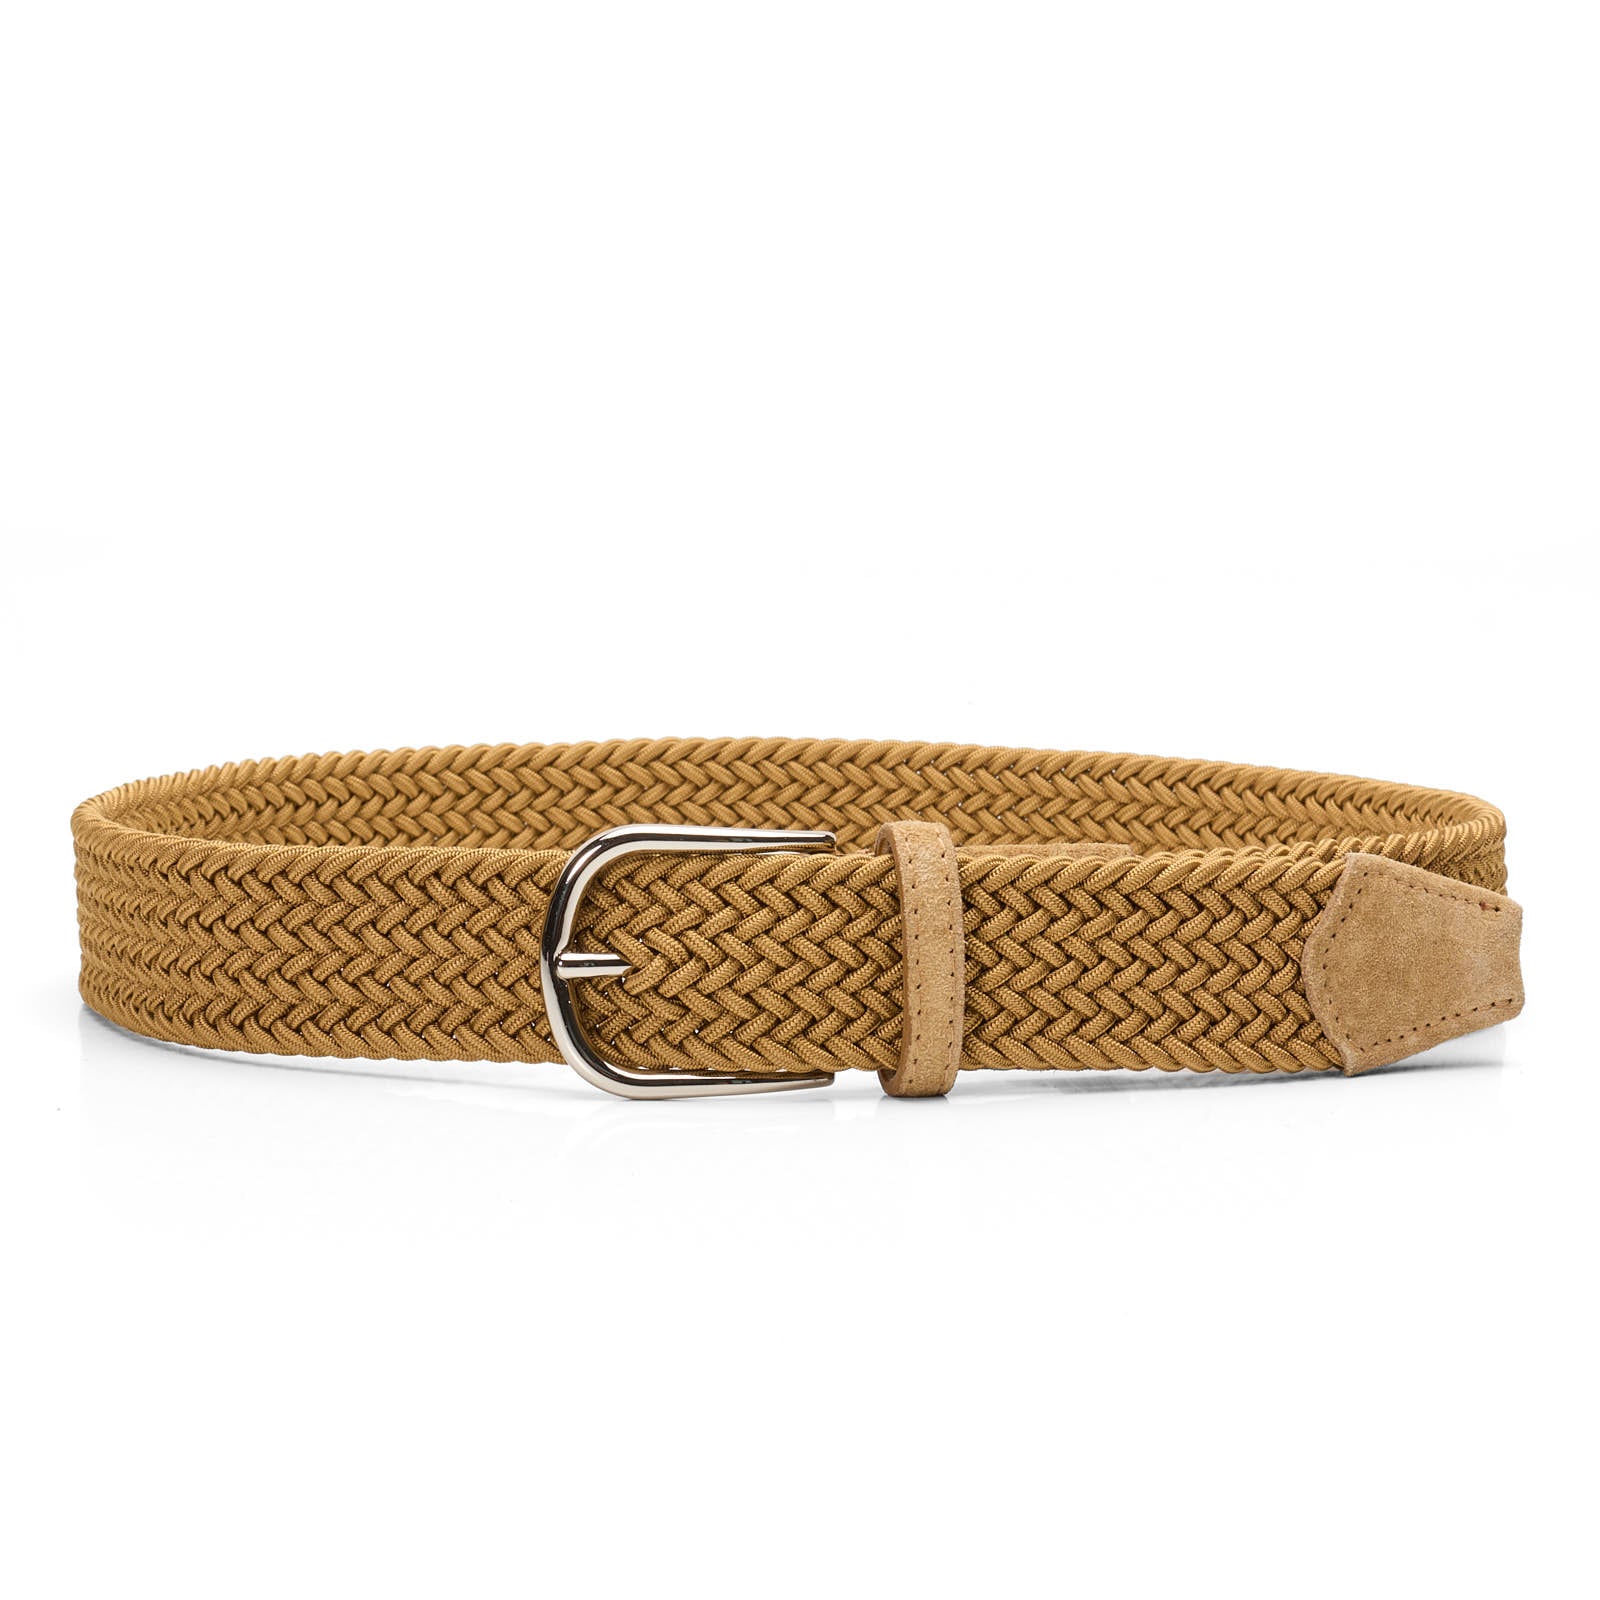 PAOLO VITALE for VANNUCCI Milano Tan Stretch Woven Braided Belt 95cm NEW 38"